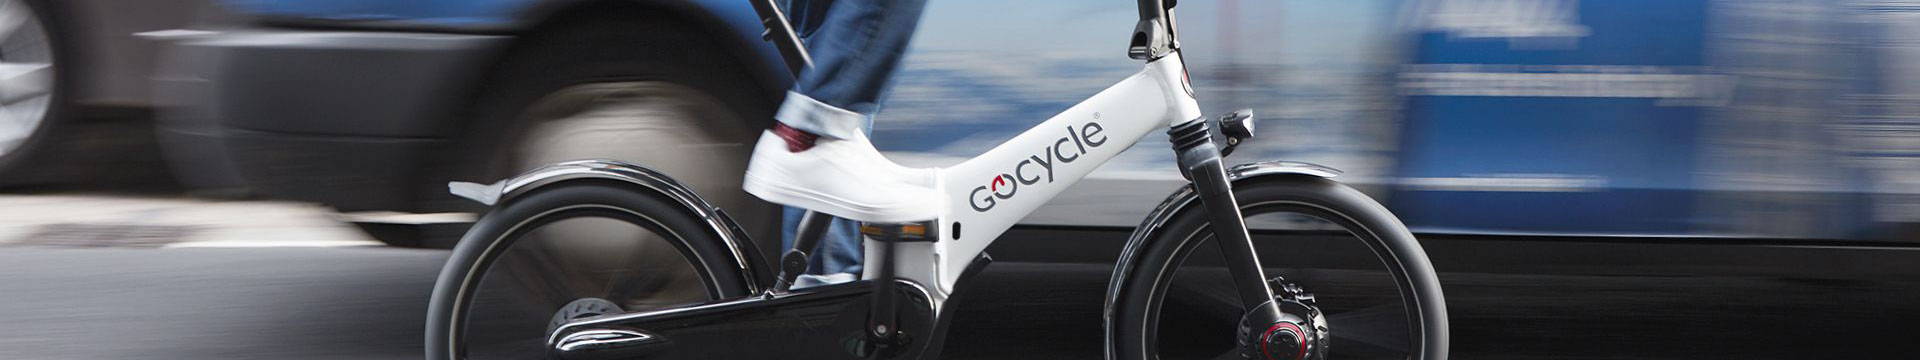 GoCycle electric folding bikes available at Mike's Bikes.